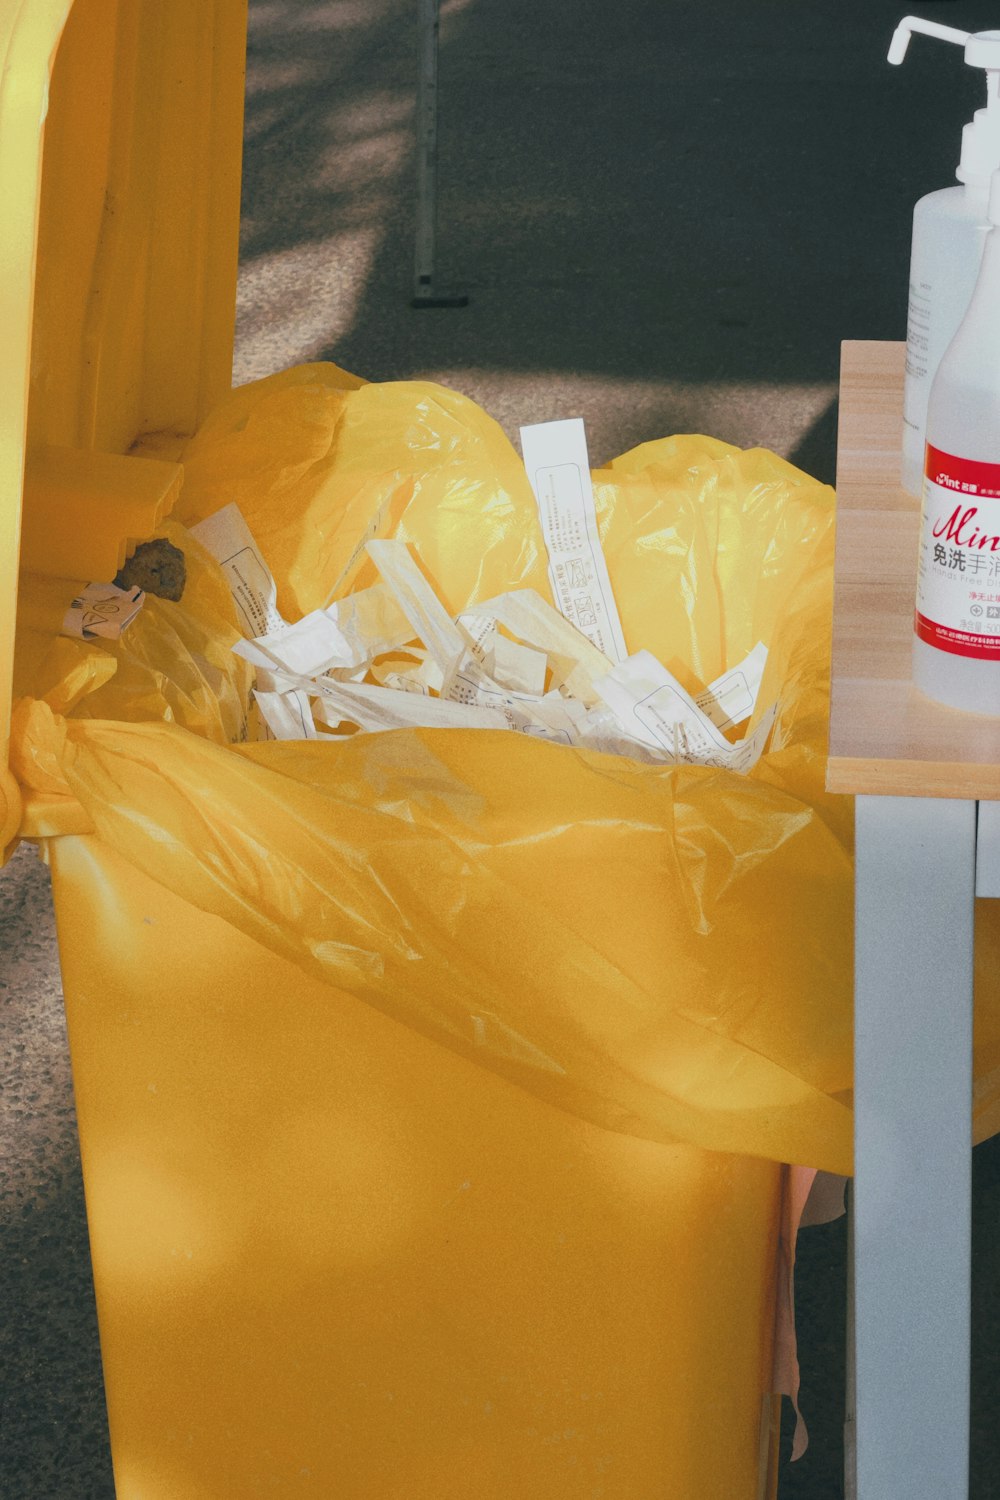 a yellow trash can with a bottle of cleaner next to it